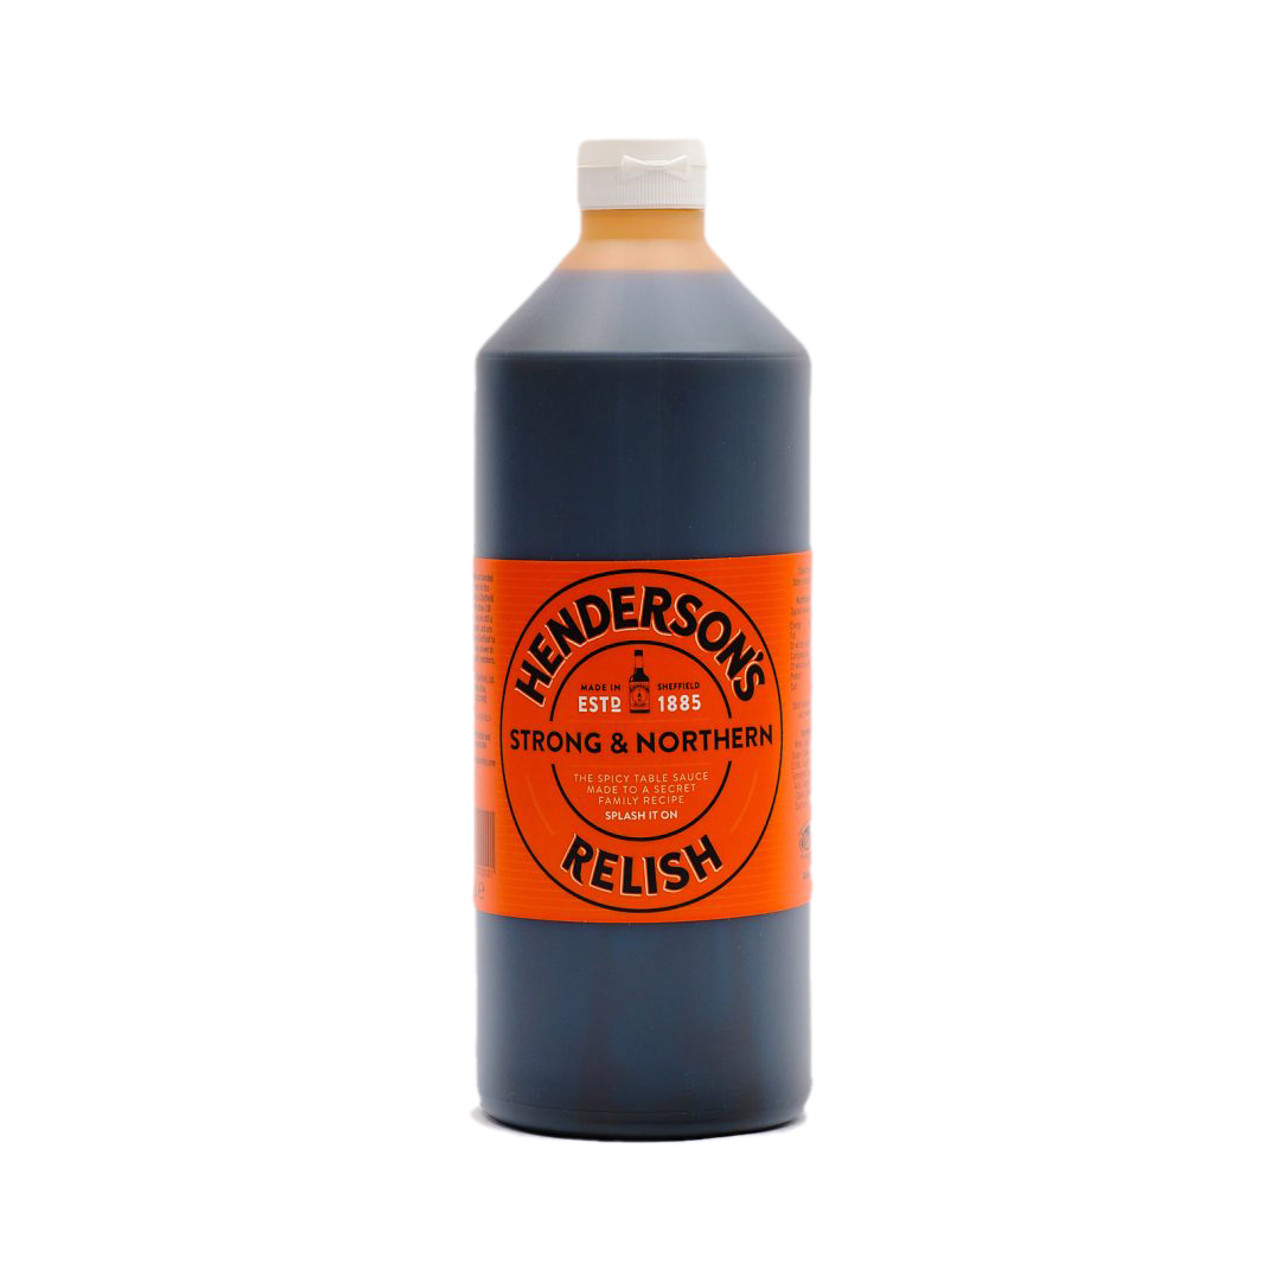 HENDERSON'S - STRONG & NORTHERN RELISH - 1L